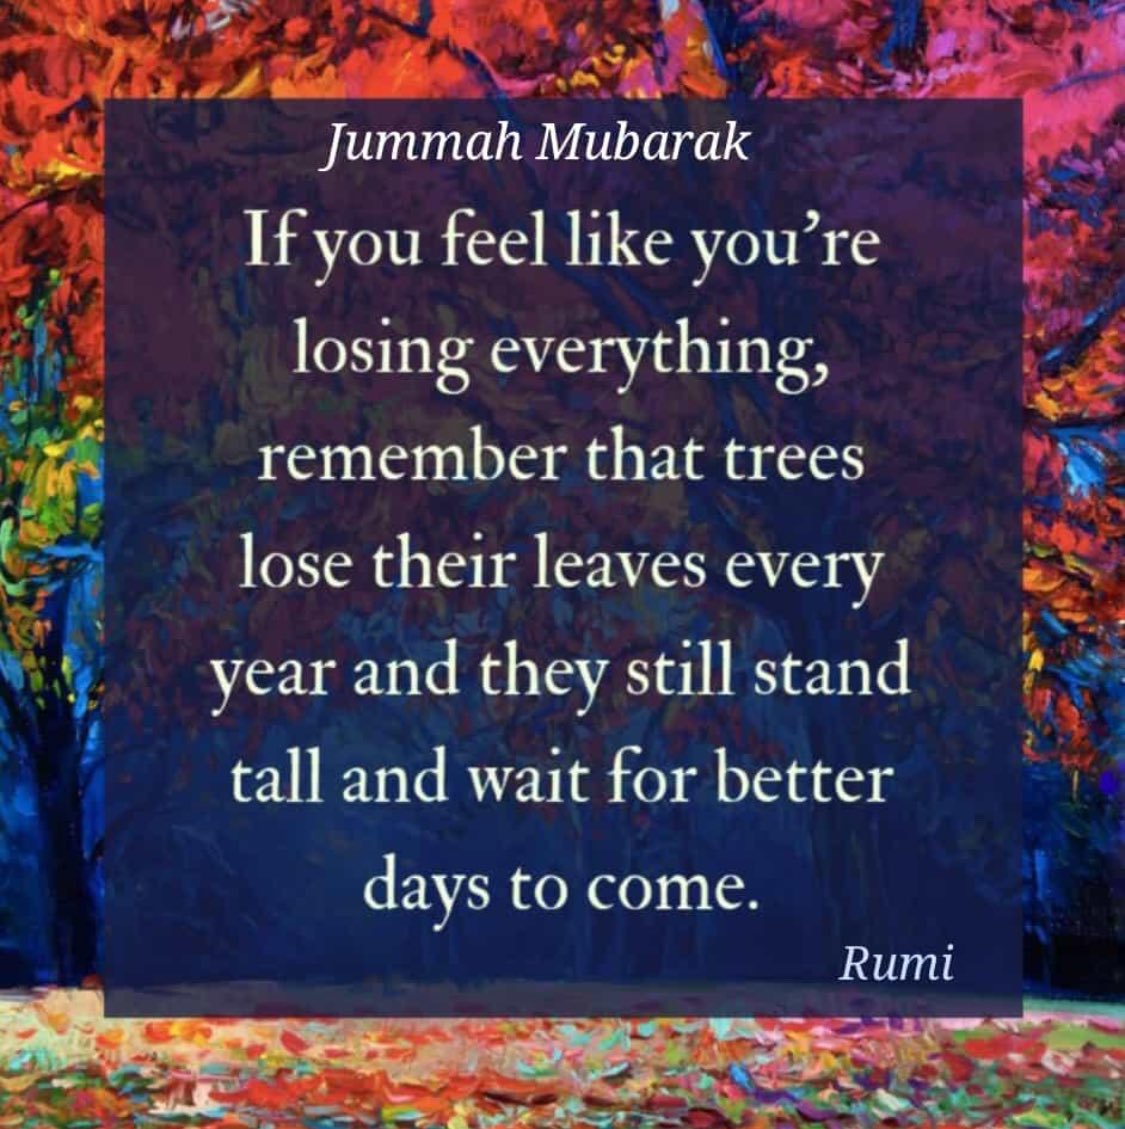 I needed to see this today #Rumi